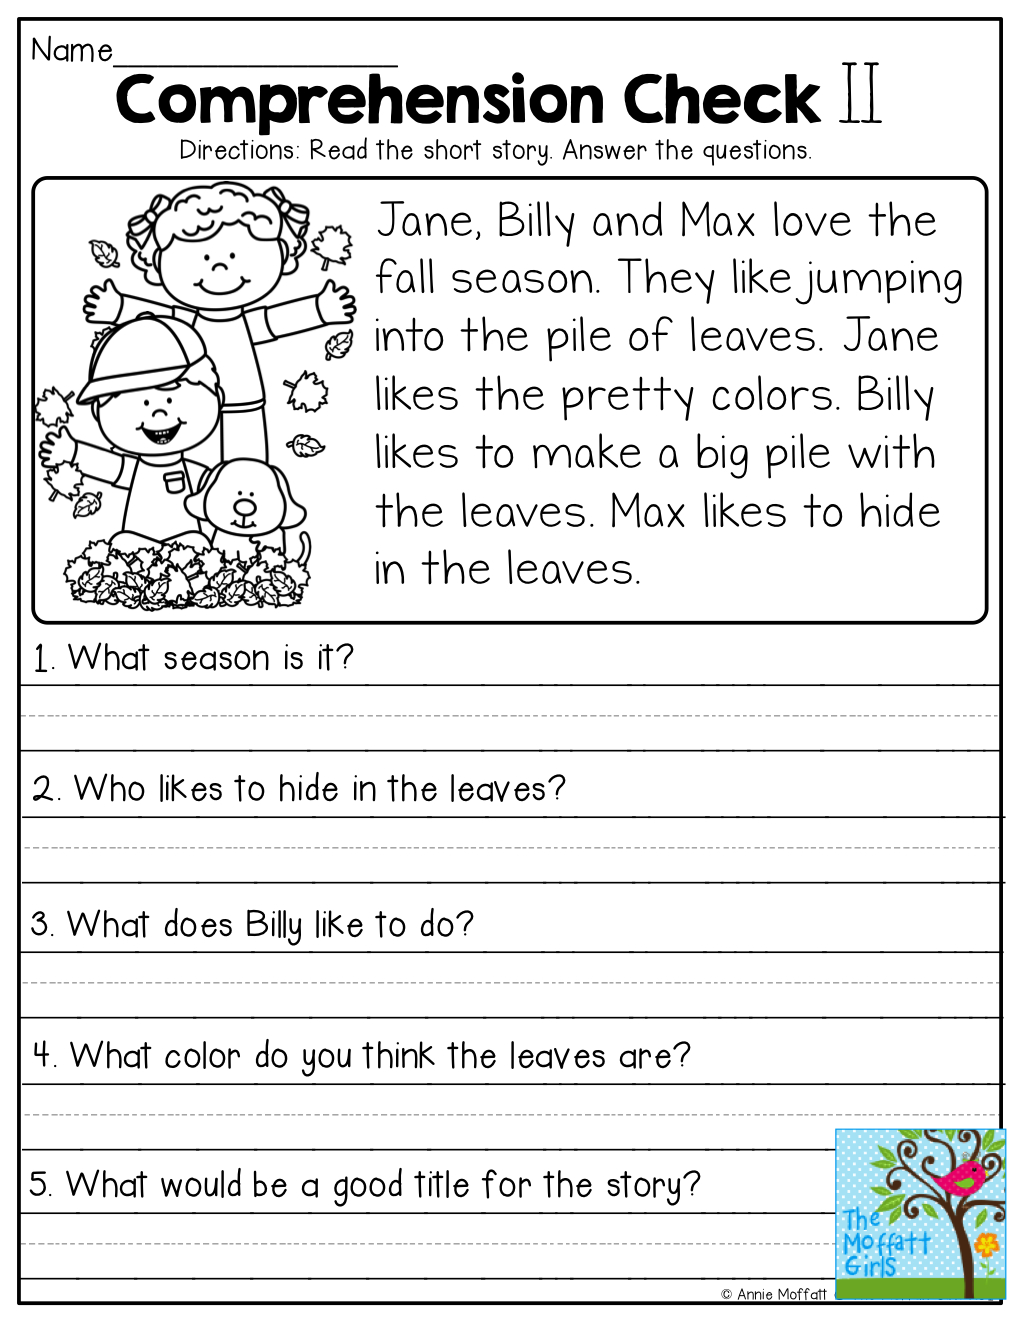 Comprehension Checks And So Many More Useful Printables! | Test Of - Free Printable Short Stories For Grade 3